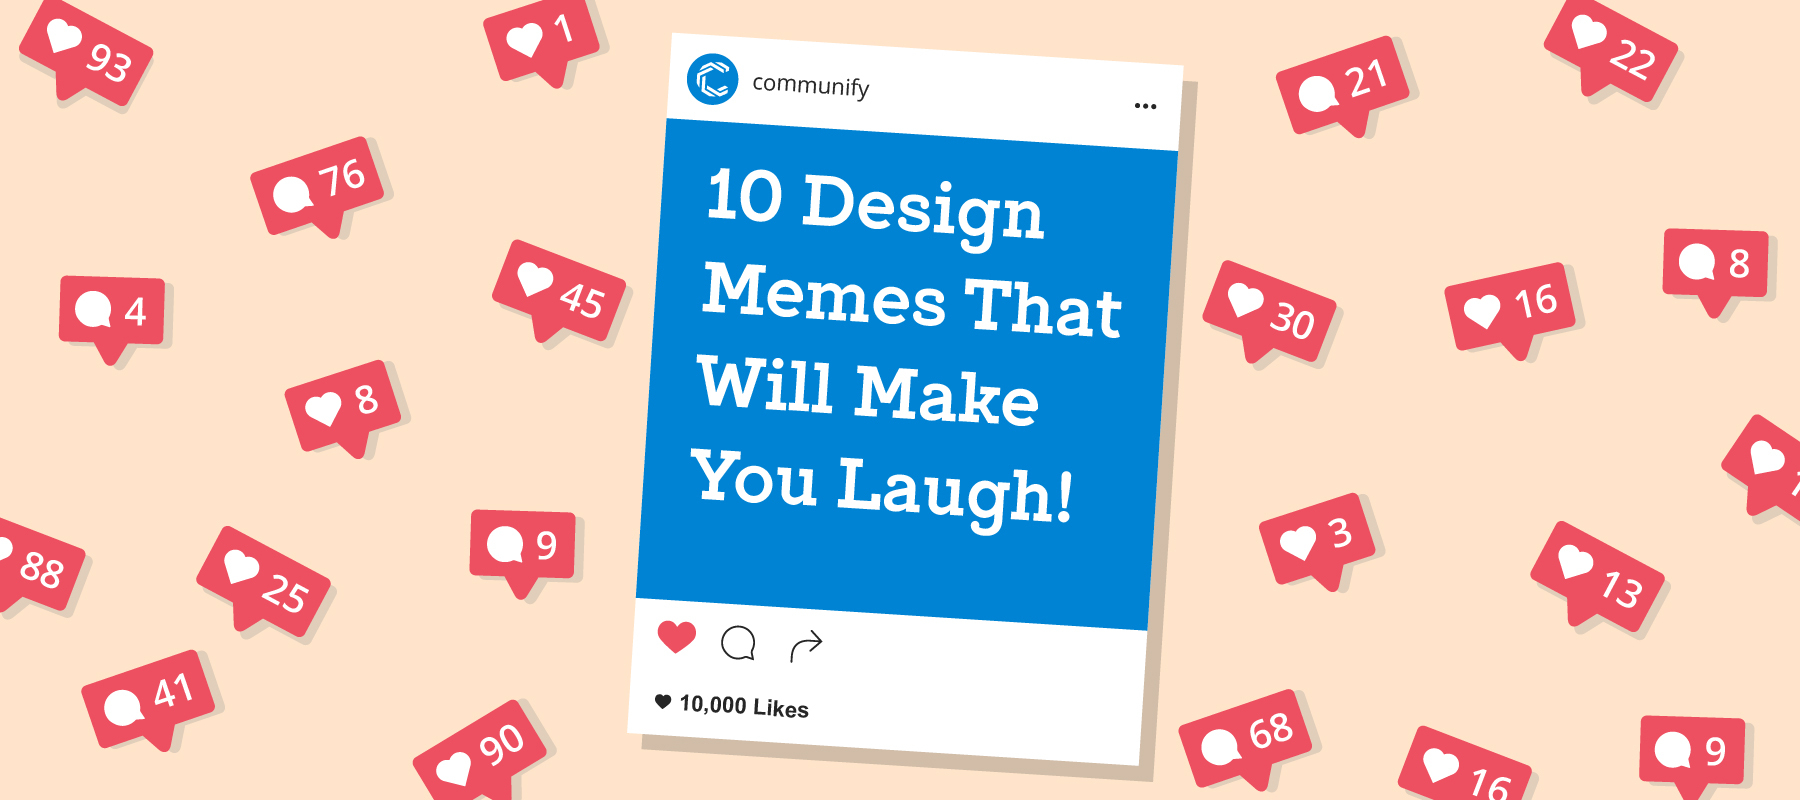 10 Design Memes That Will Make You Laugh